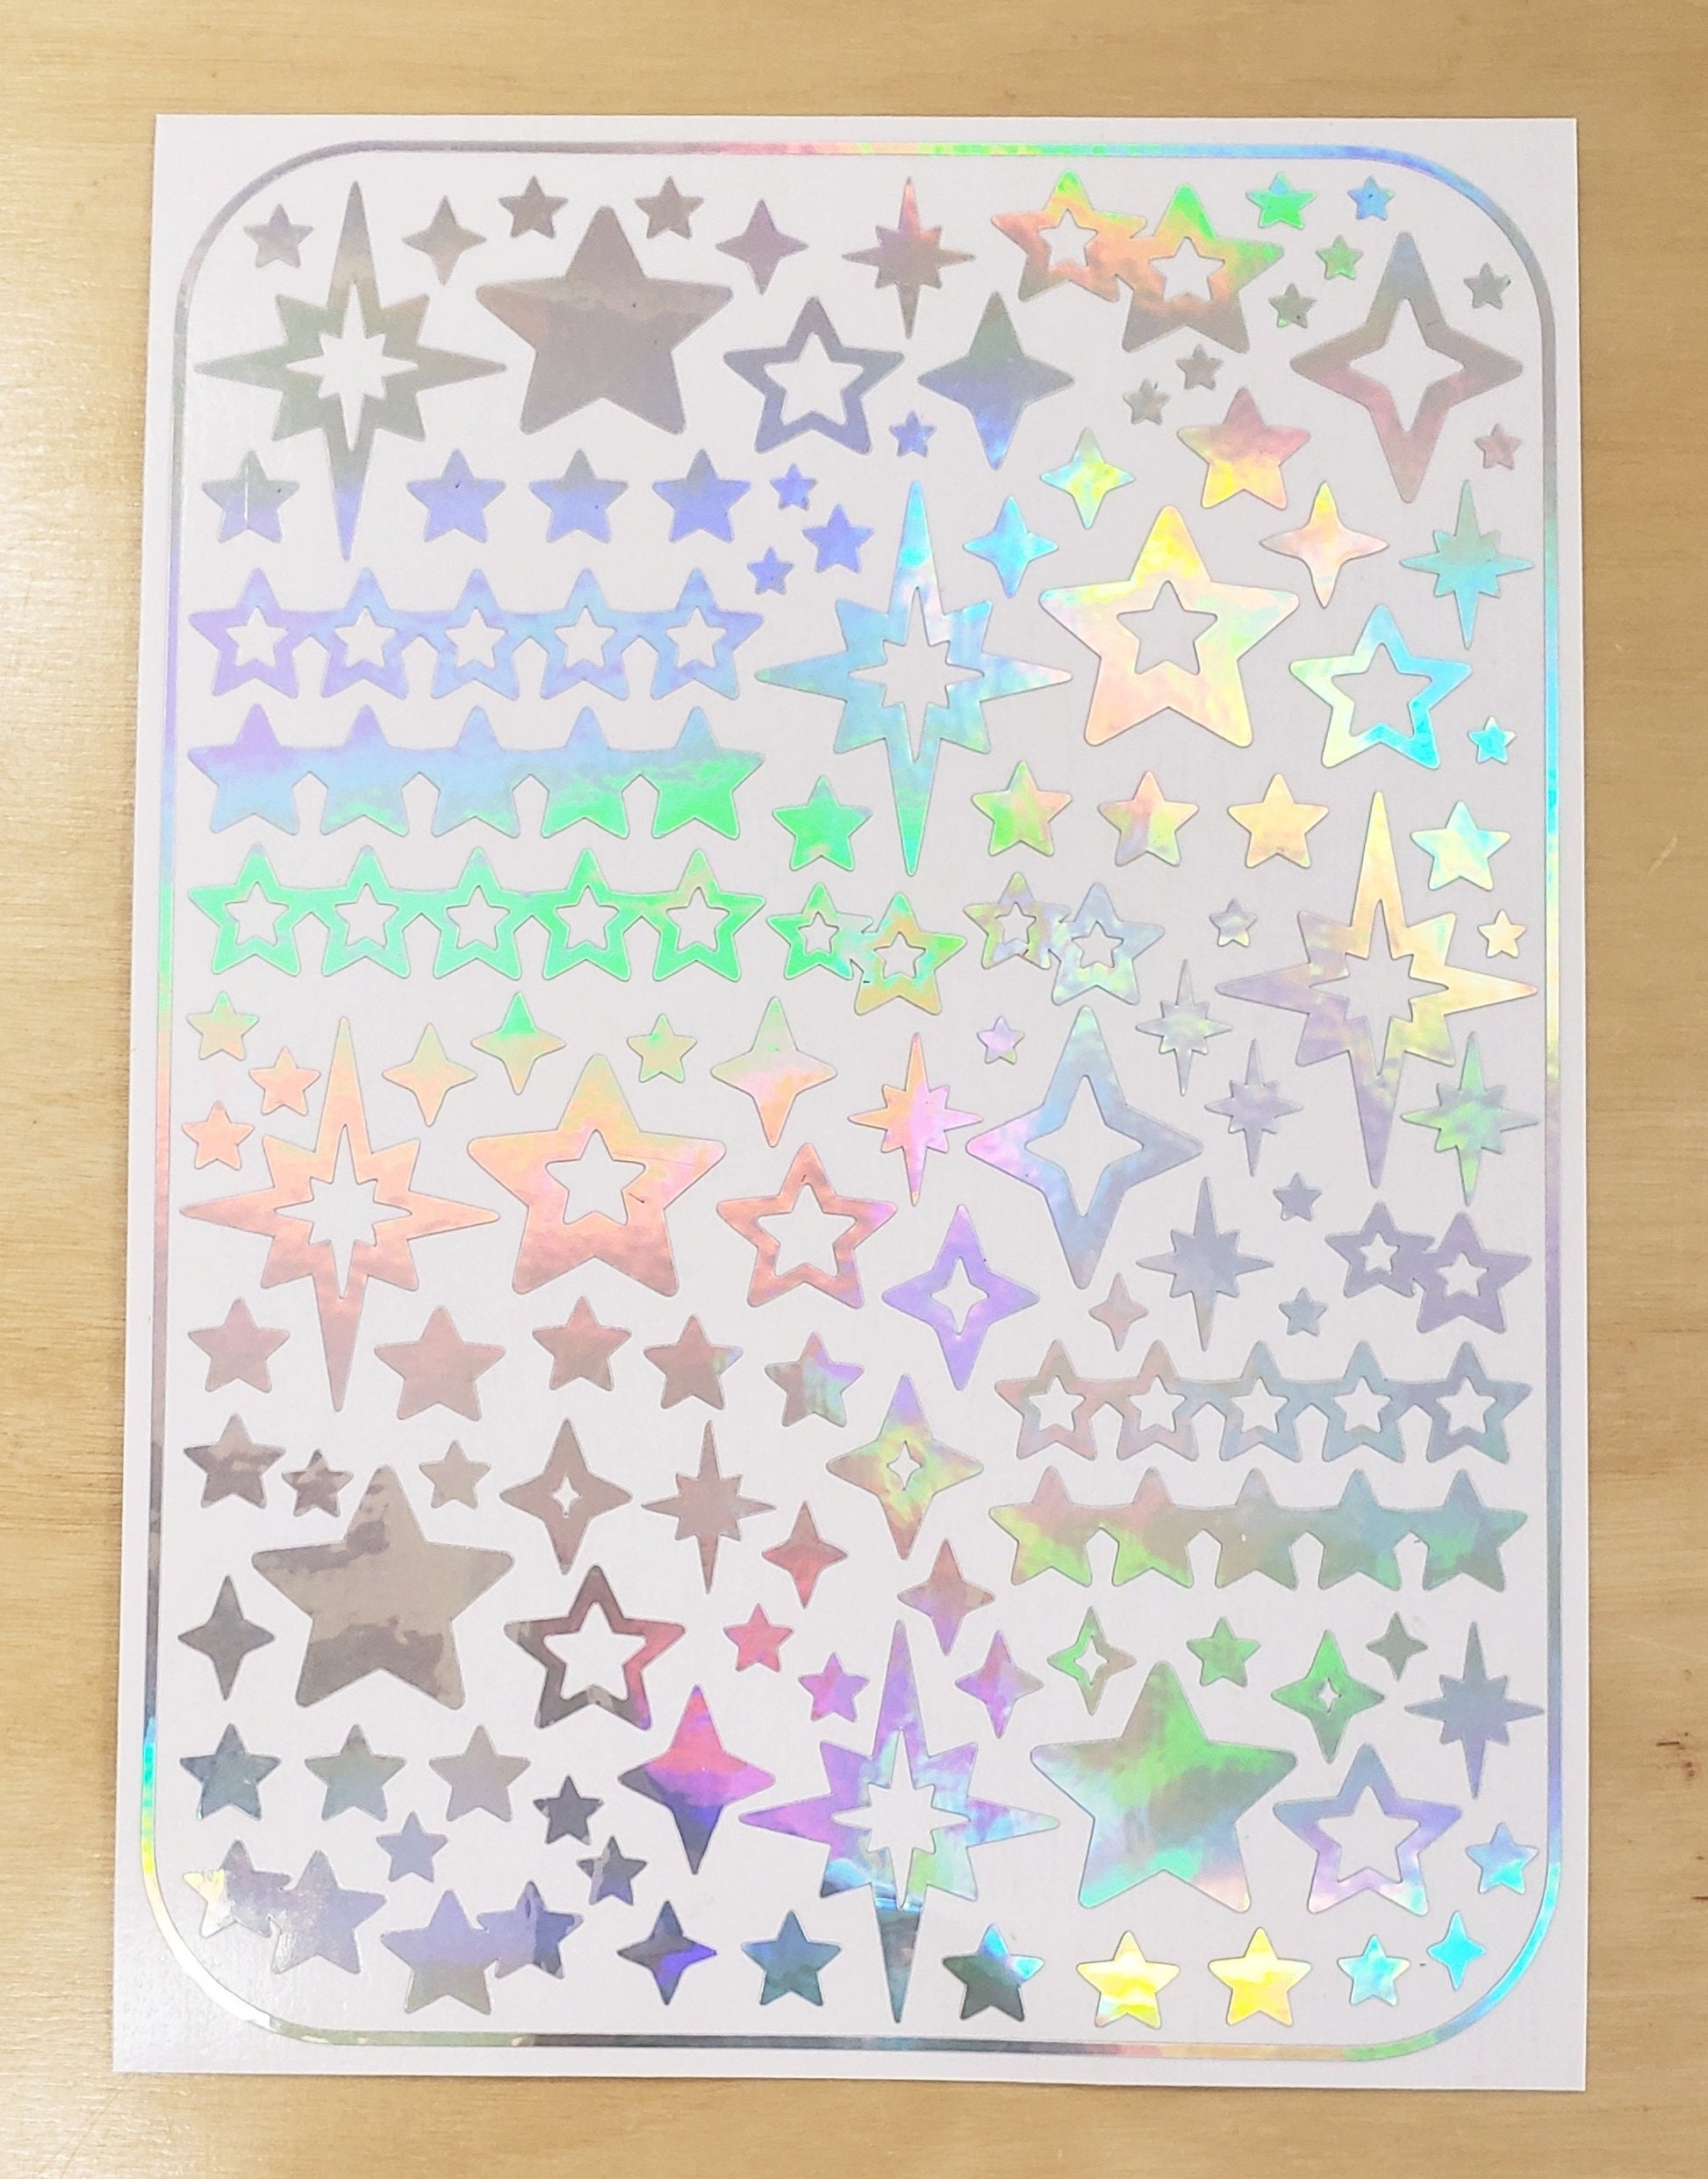 Star Stickers, set of 100 peel and stick kiss cut star stickers for cards, envelopes and journals, glitter or sparkle vinyl star stickers